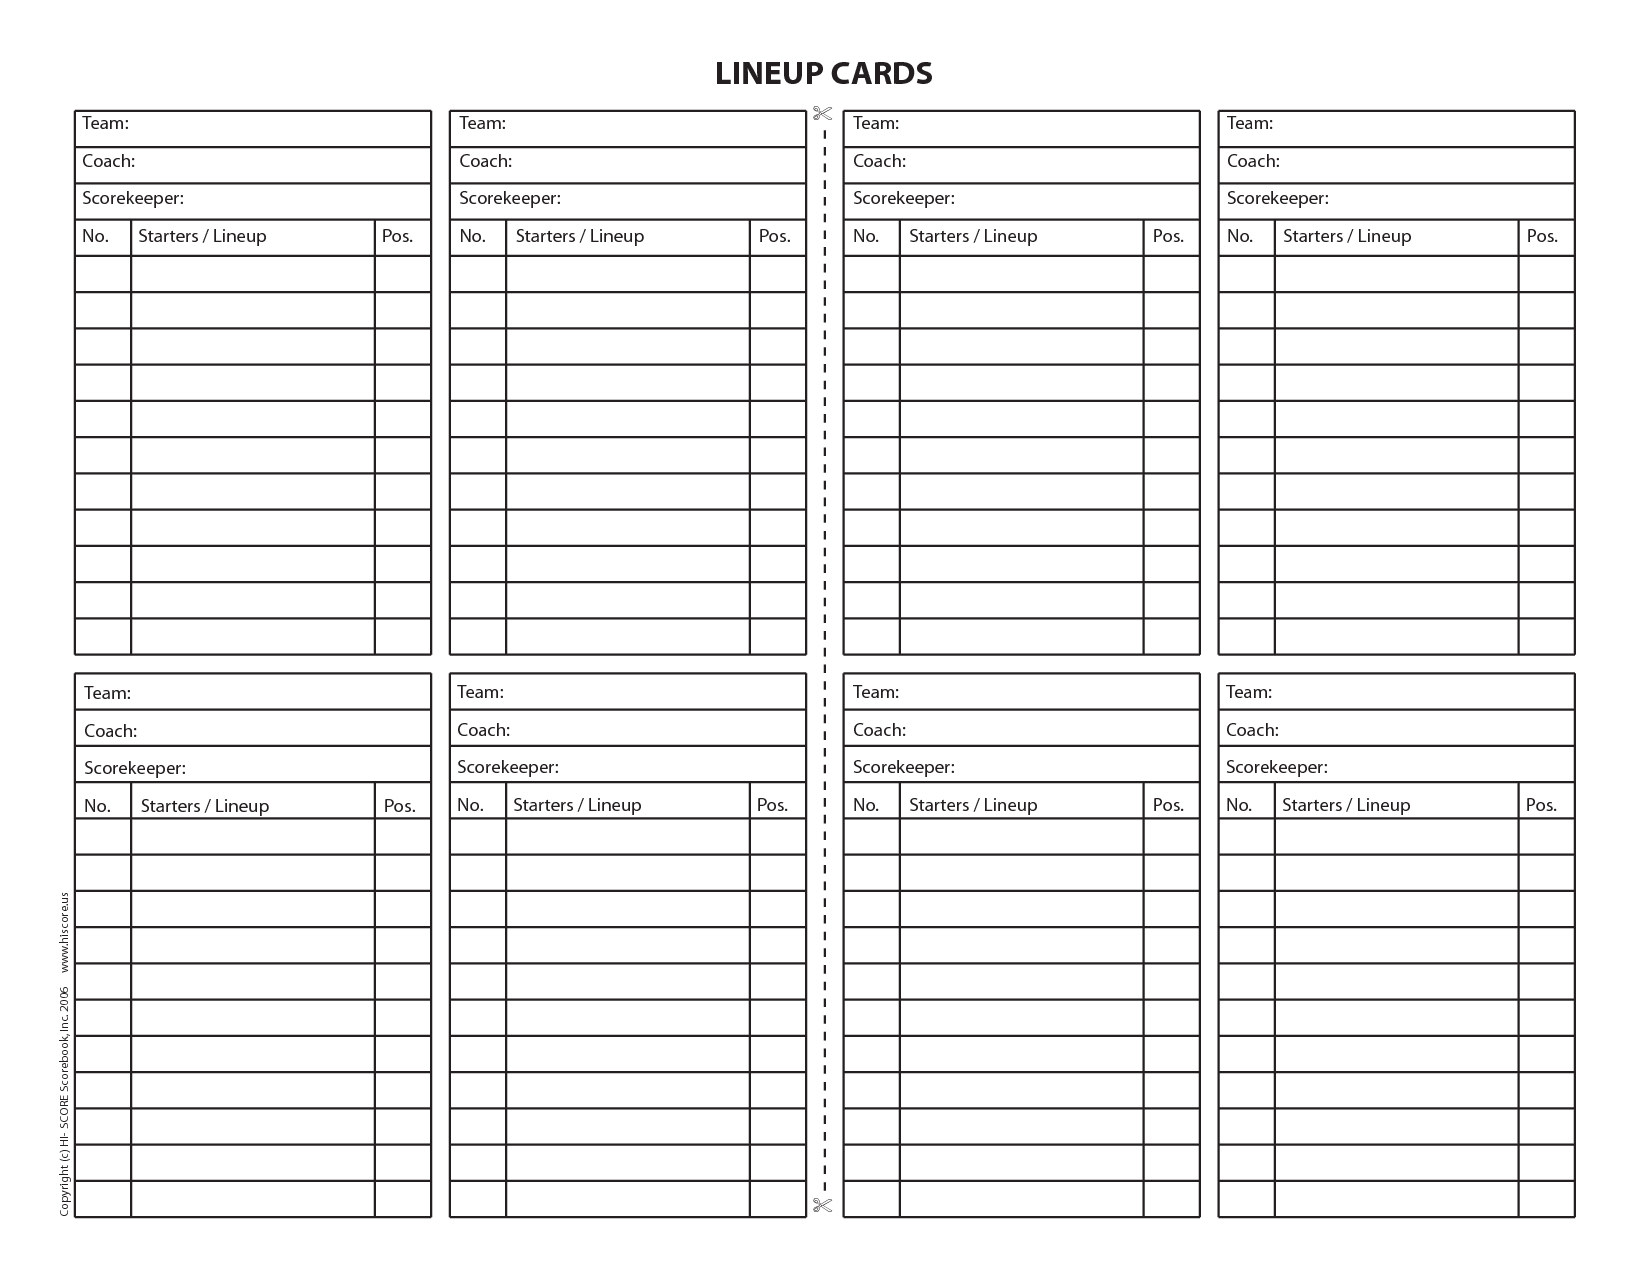 Baseball Lineup Card | Baseball Lineup, Lineup, Baseball Within Dugout Lineup Card Template